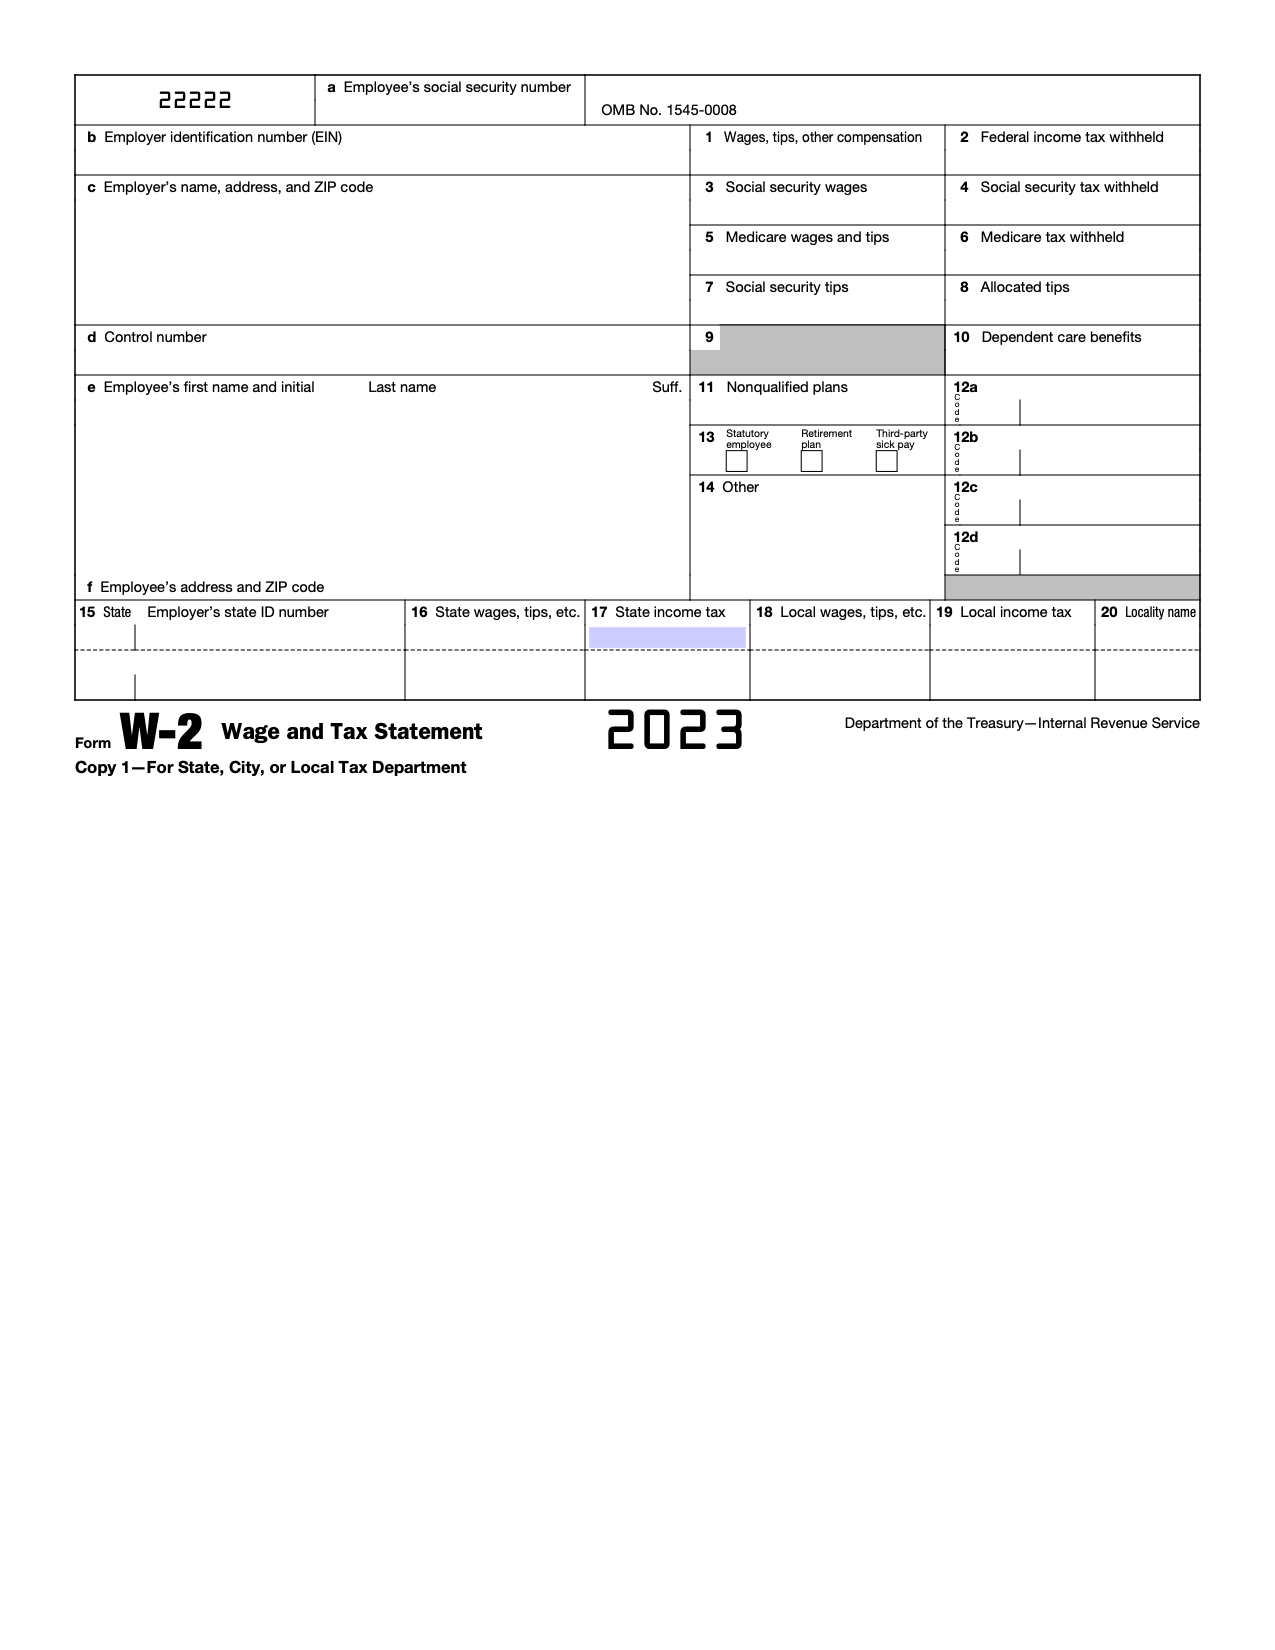 Free Irs Form W-2 | Wage And Tax Statement - Pdf – Eforms with Free W2 Forms